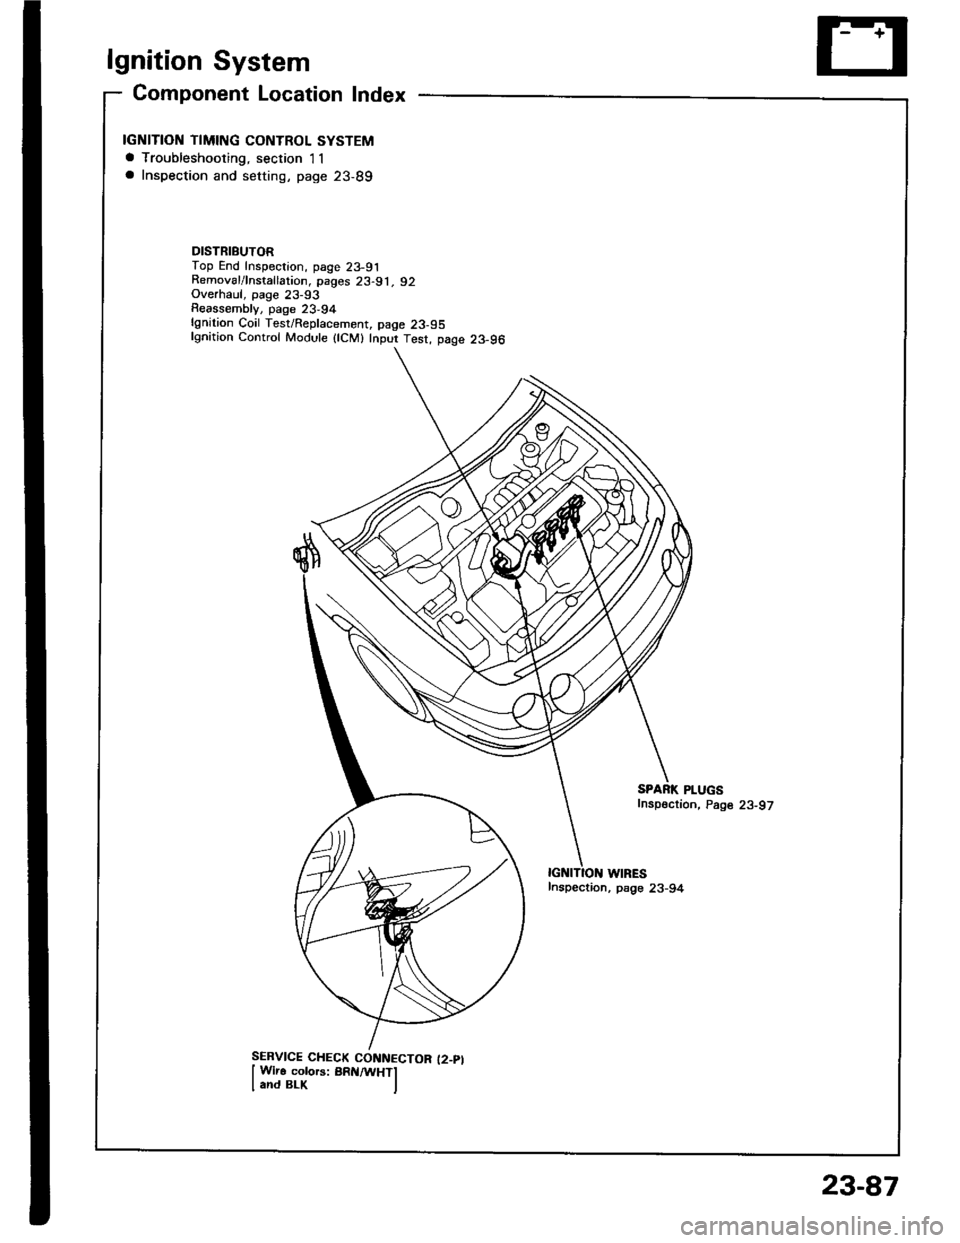 HONDA INTEGRA 1994 4.G Workshop Manual lgnition System
Gomponent Location Index
IGNITION TIMING CONTROL SYSTEMa Troubleshooting, section I1a Inspection and setting, page 23-89
DISTRIBUTORTop End Inspection, page 23-91Removal/lnstallation, 